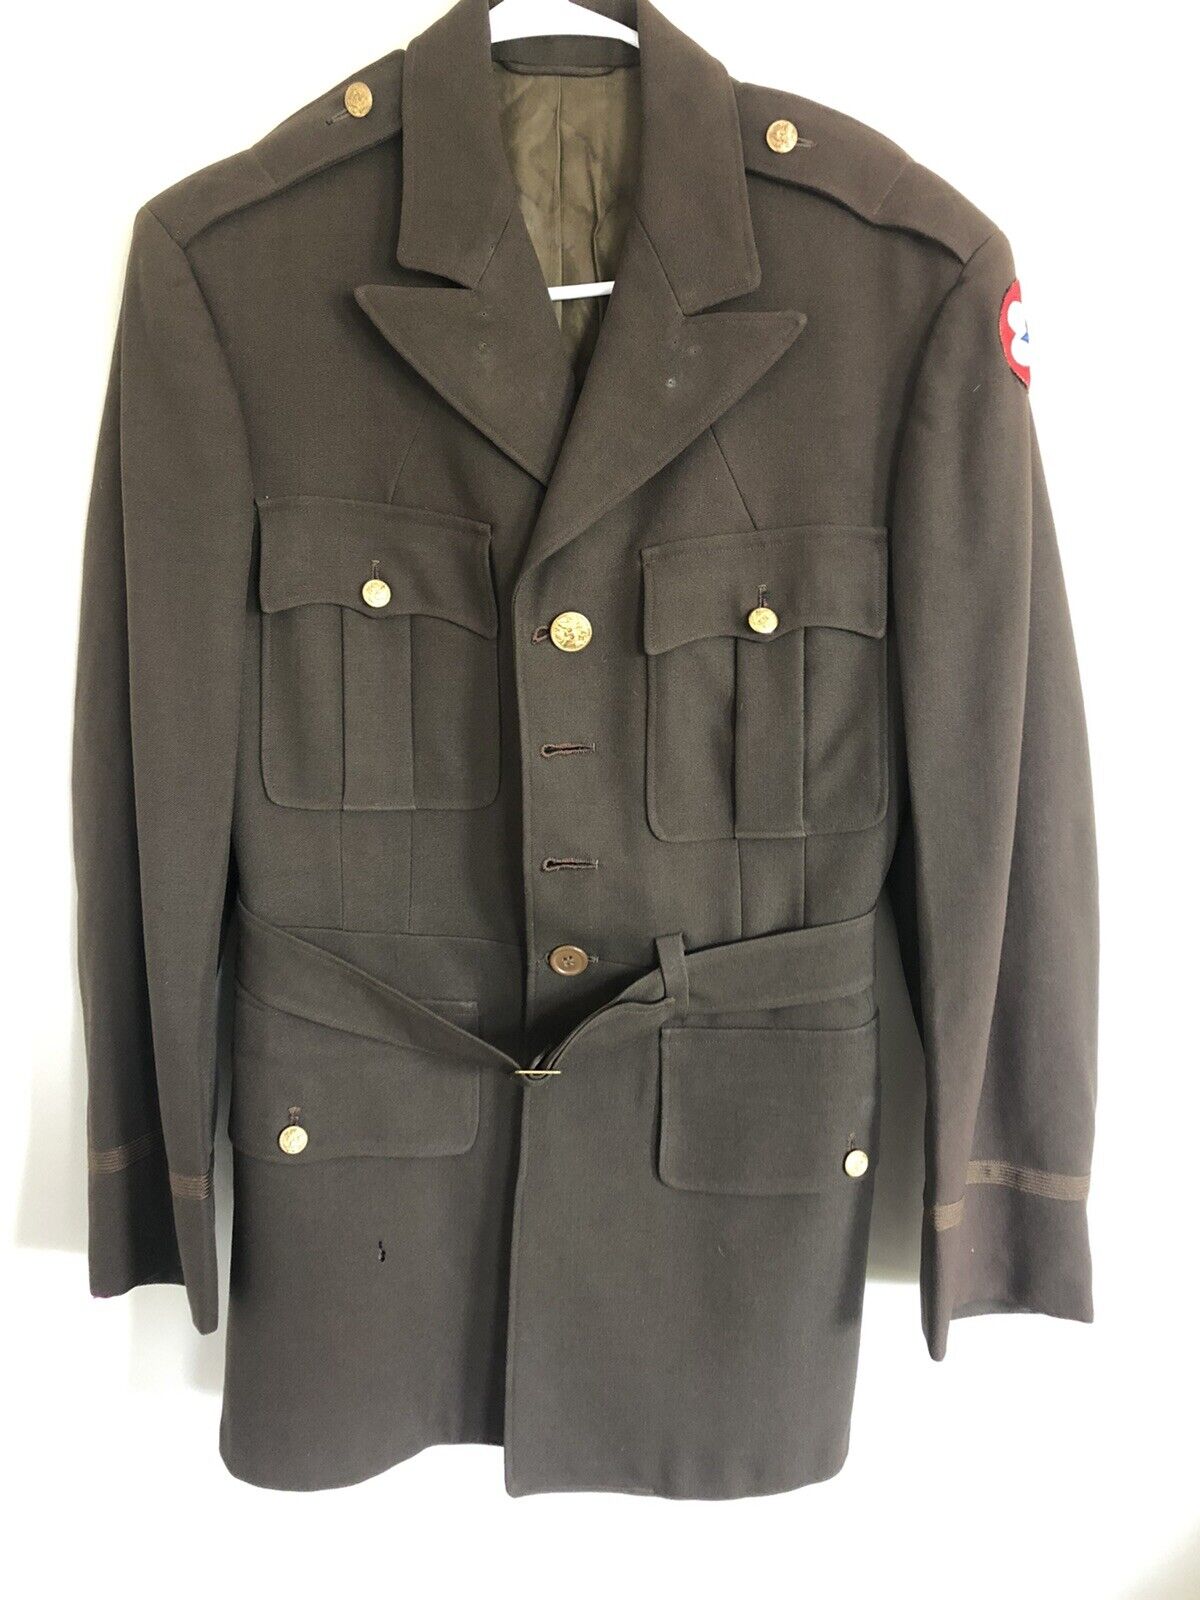 WW2 US Army Officers Uniform Named Dated 1943